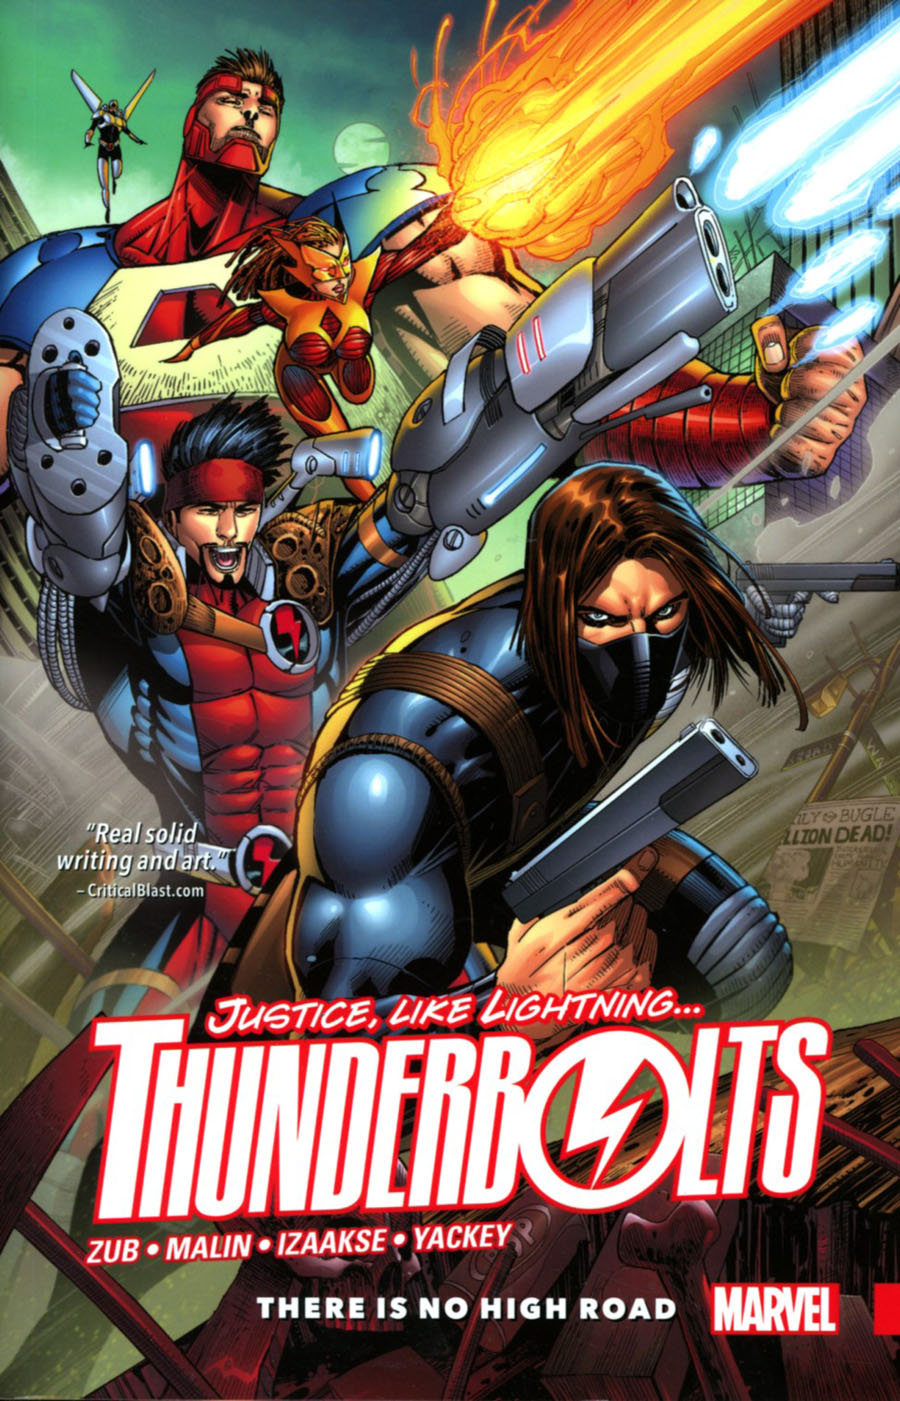 Thunderbolts Vol 1 There Is No High Road TP